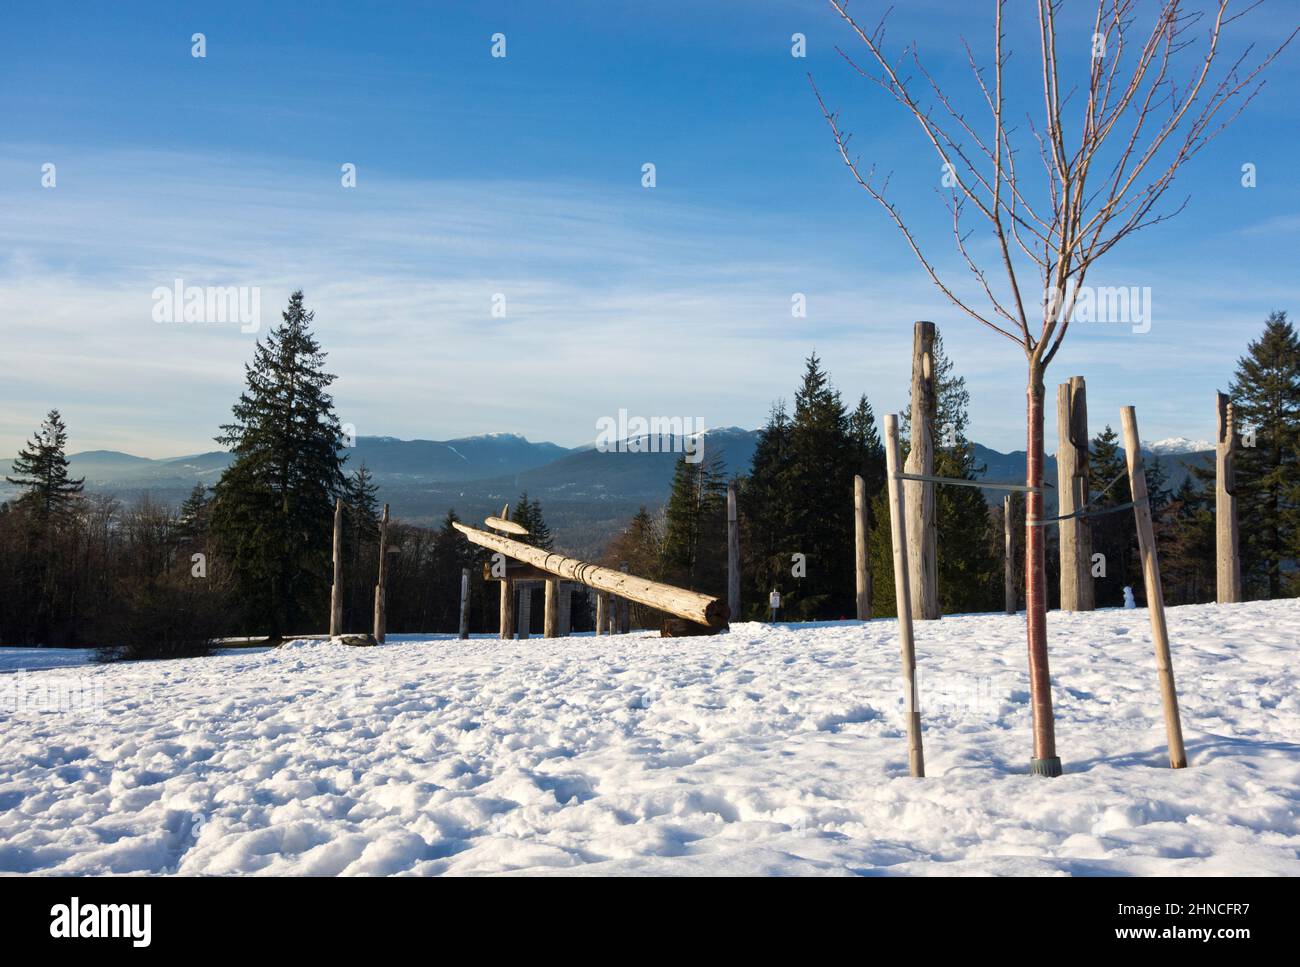 Snow covered Burnaby Mountain park with Ainu sculptures in January 2022. View of the trees and mountains. Burnaby, British Columbia, Canada. Stock Photo